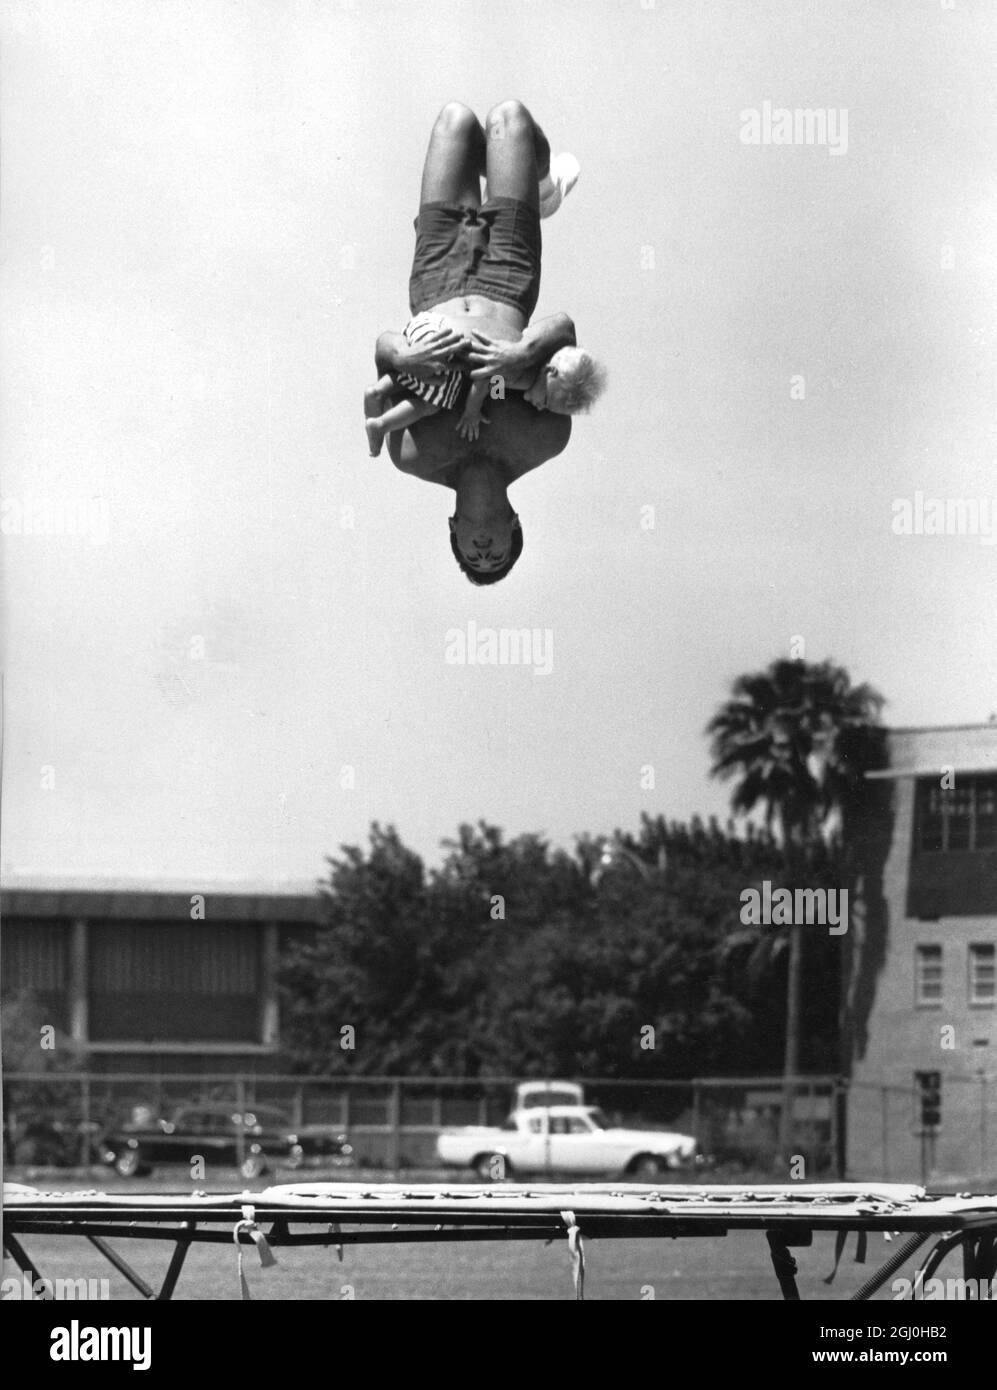 Harvey Plant carefully cradles his son in his arms while doing a back flip on the trampoline. Danny has complete confidence in his father and shows no fear during these high-flying somersaults. 1964 *** Local Caption *** High-flying father and son Stock Photo